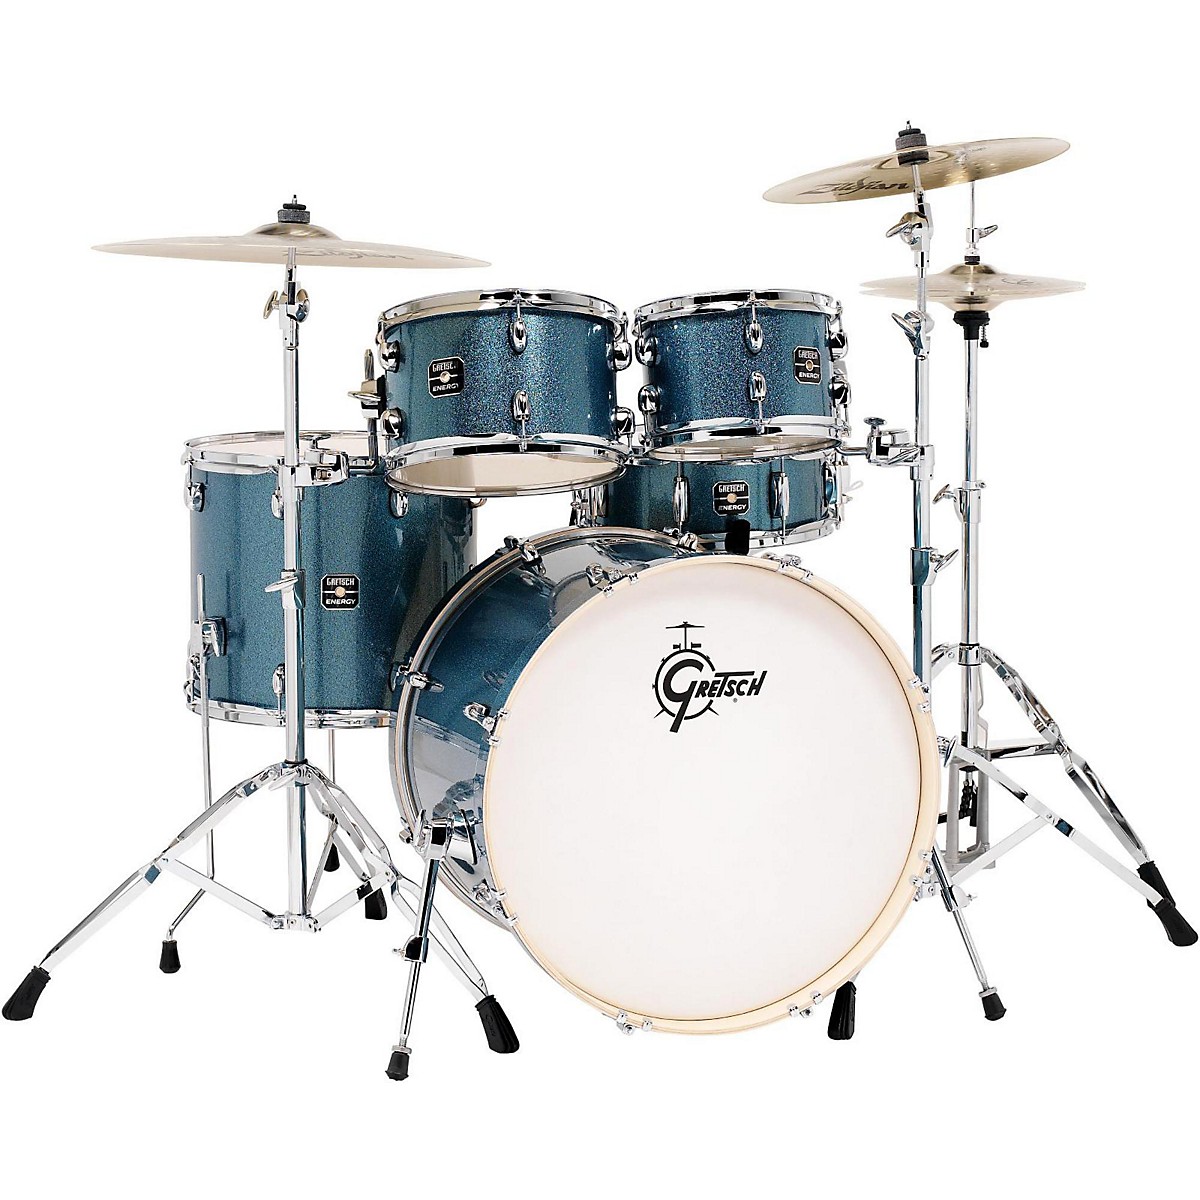 Gretsch Drums Energy 5-Piece Drum Set Blue Sparkle with Hardware and